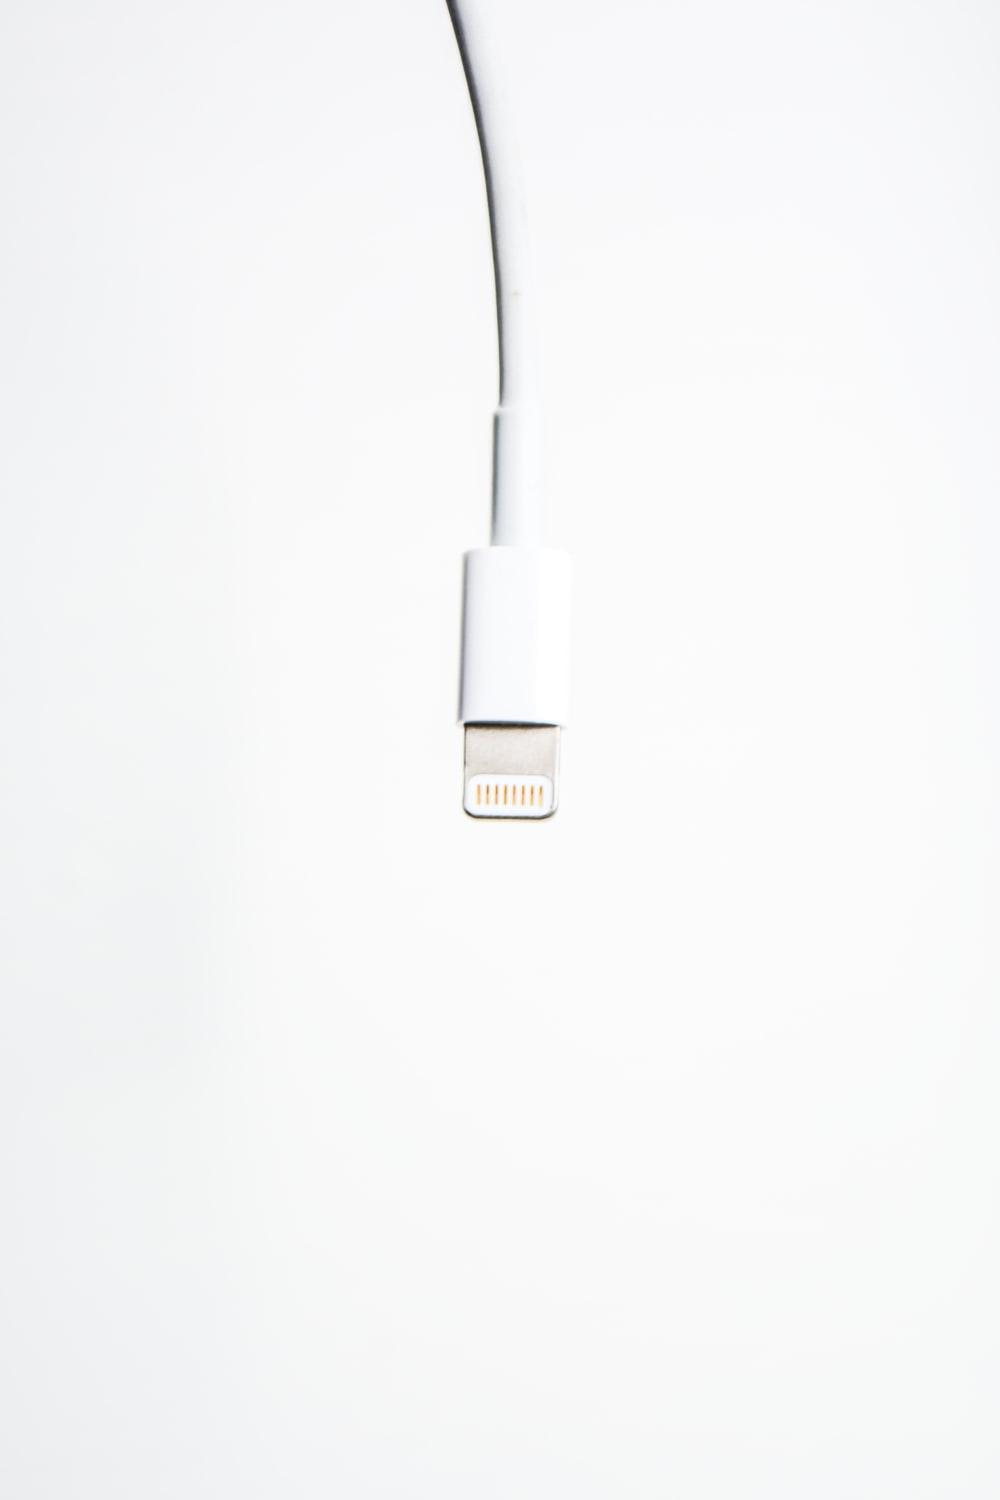 Charger Picture. Download Free Image